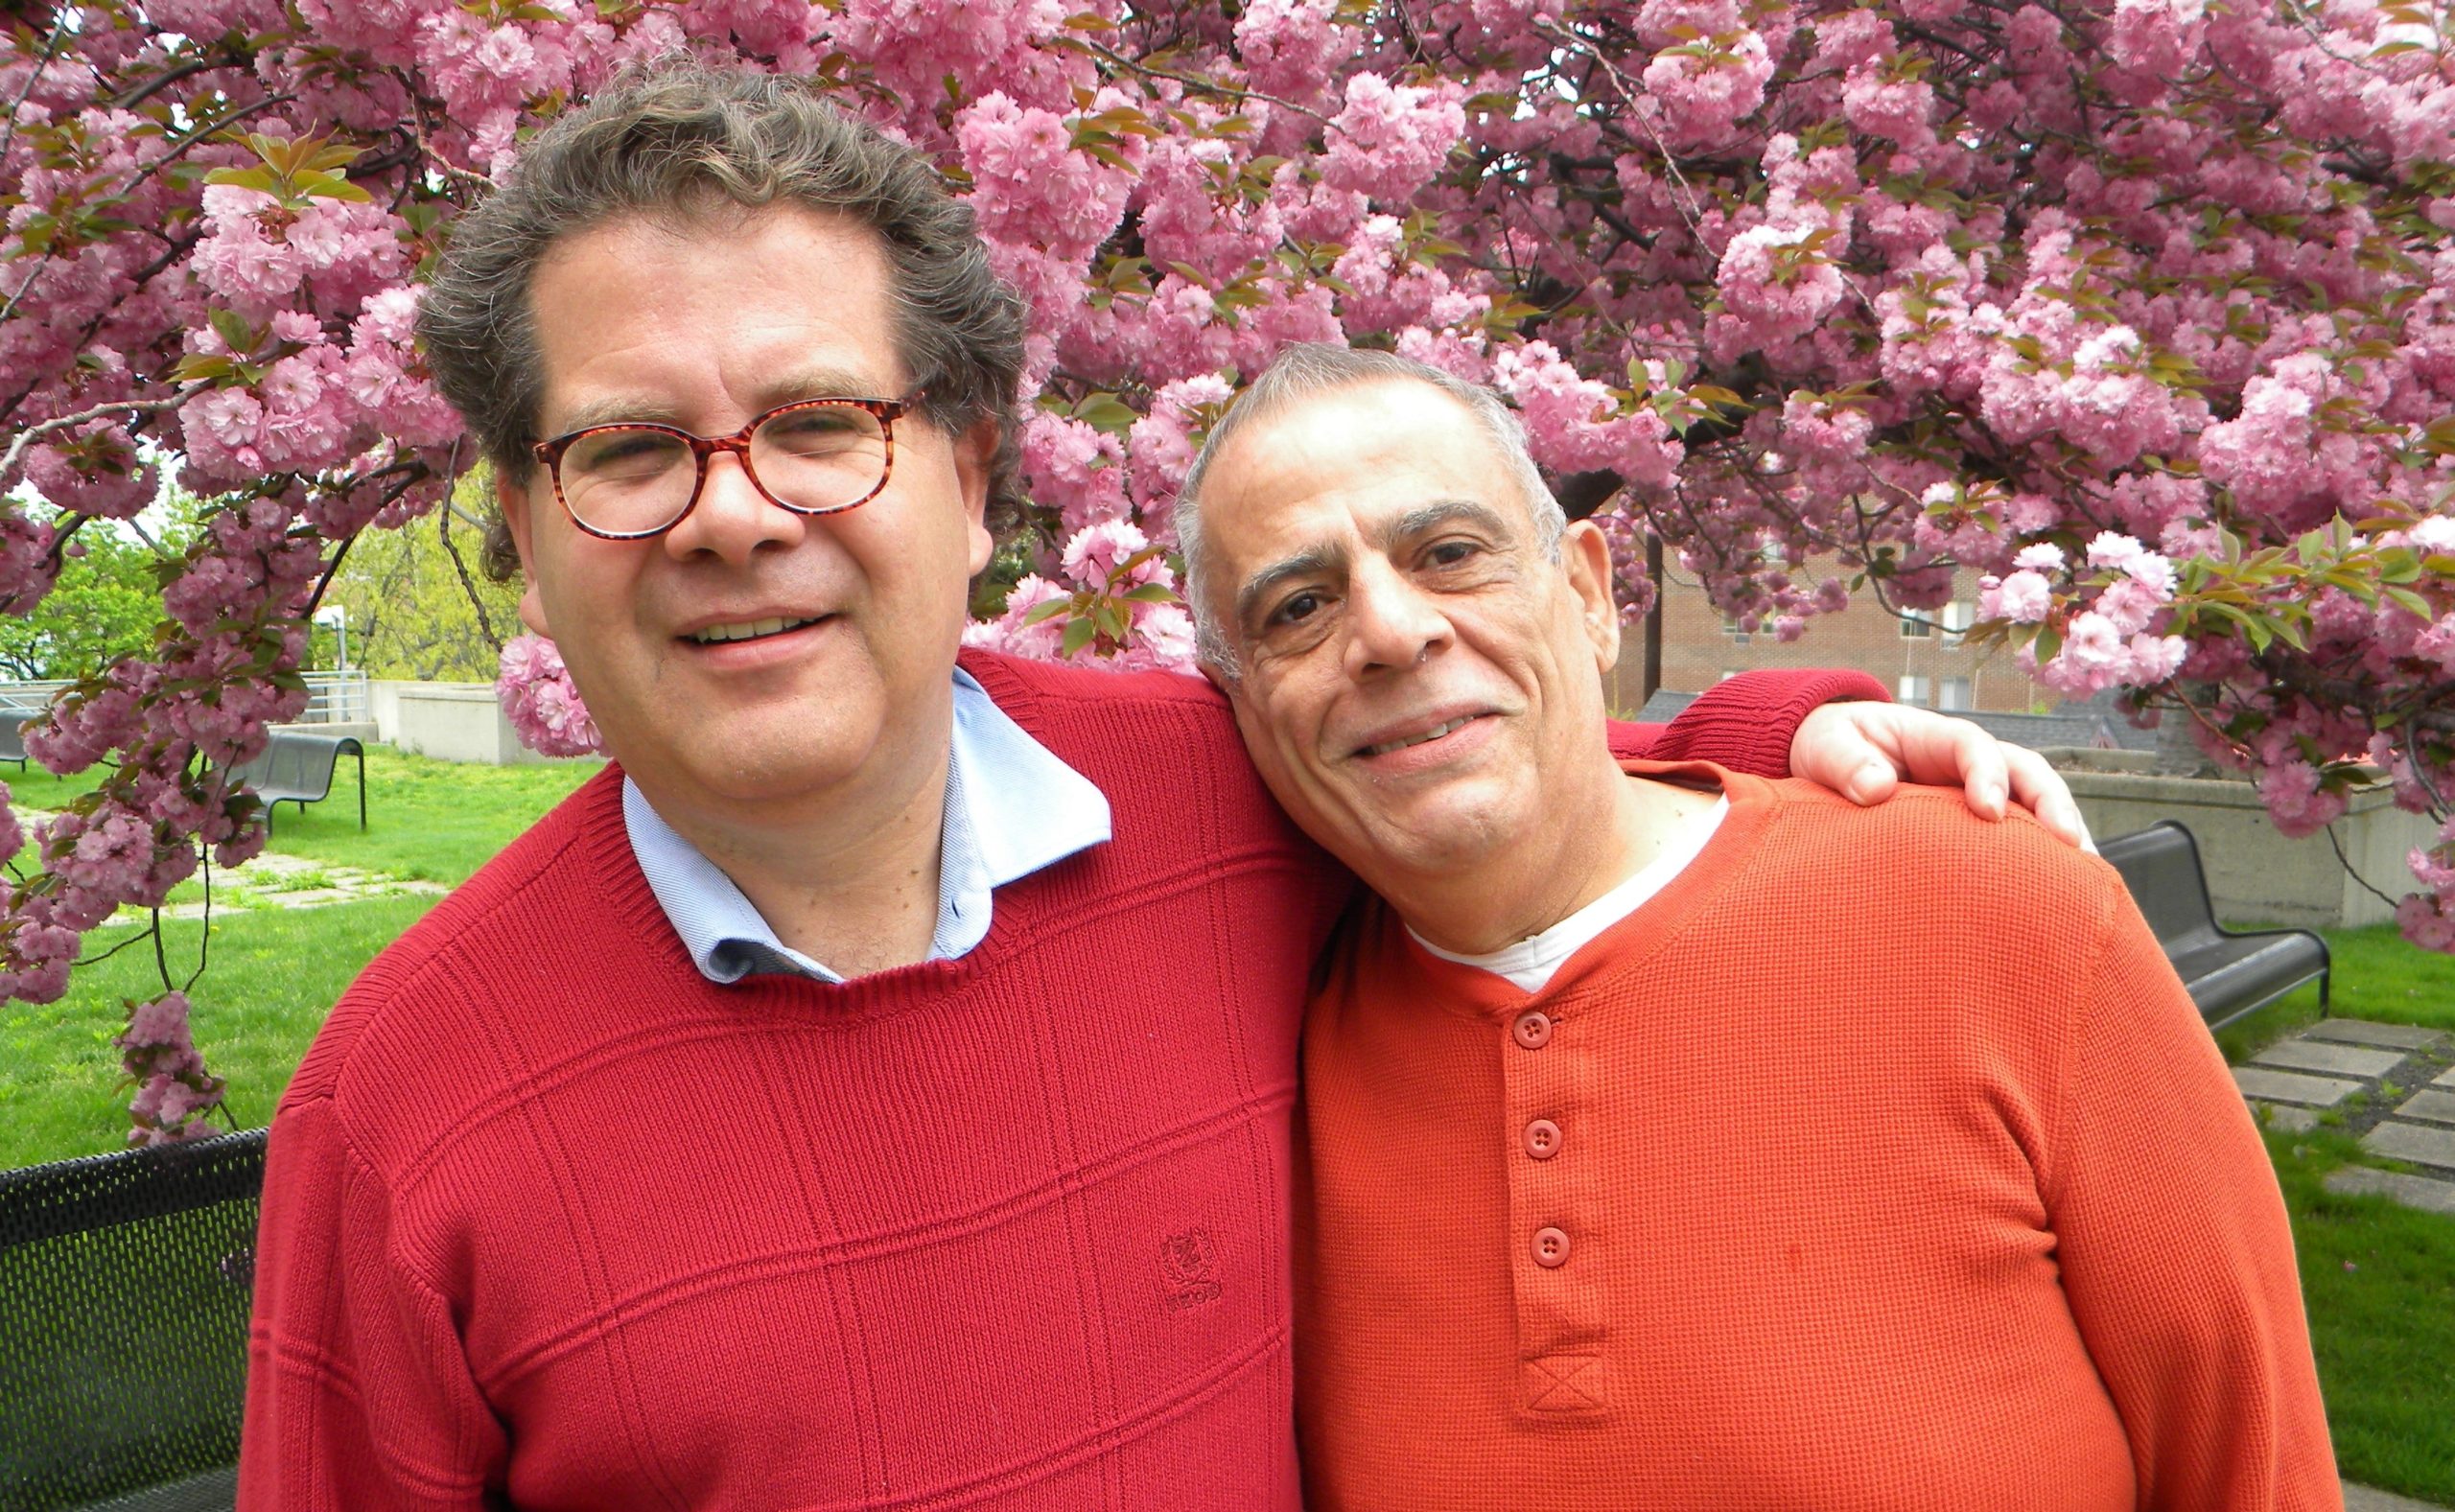 Santiago and Pablo hugging in front of a pink blossoming tree with colorful sweaters on